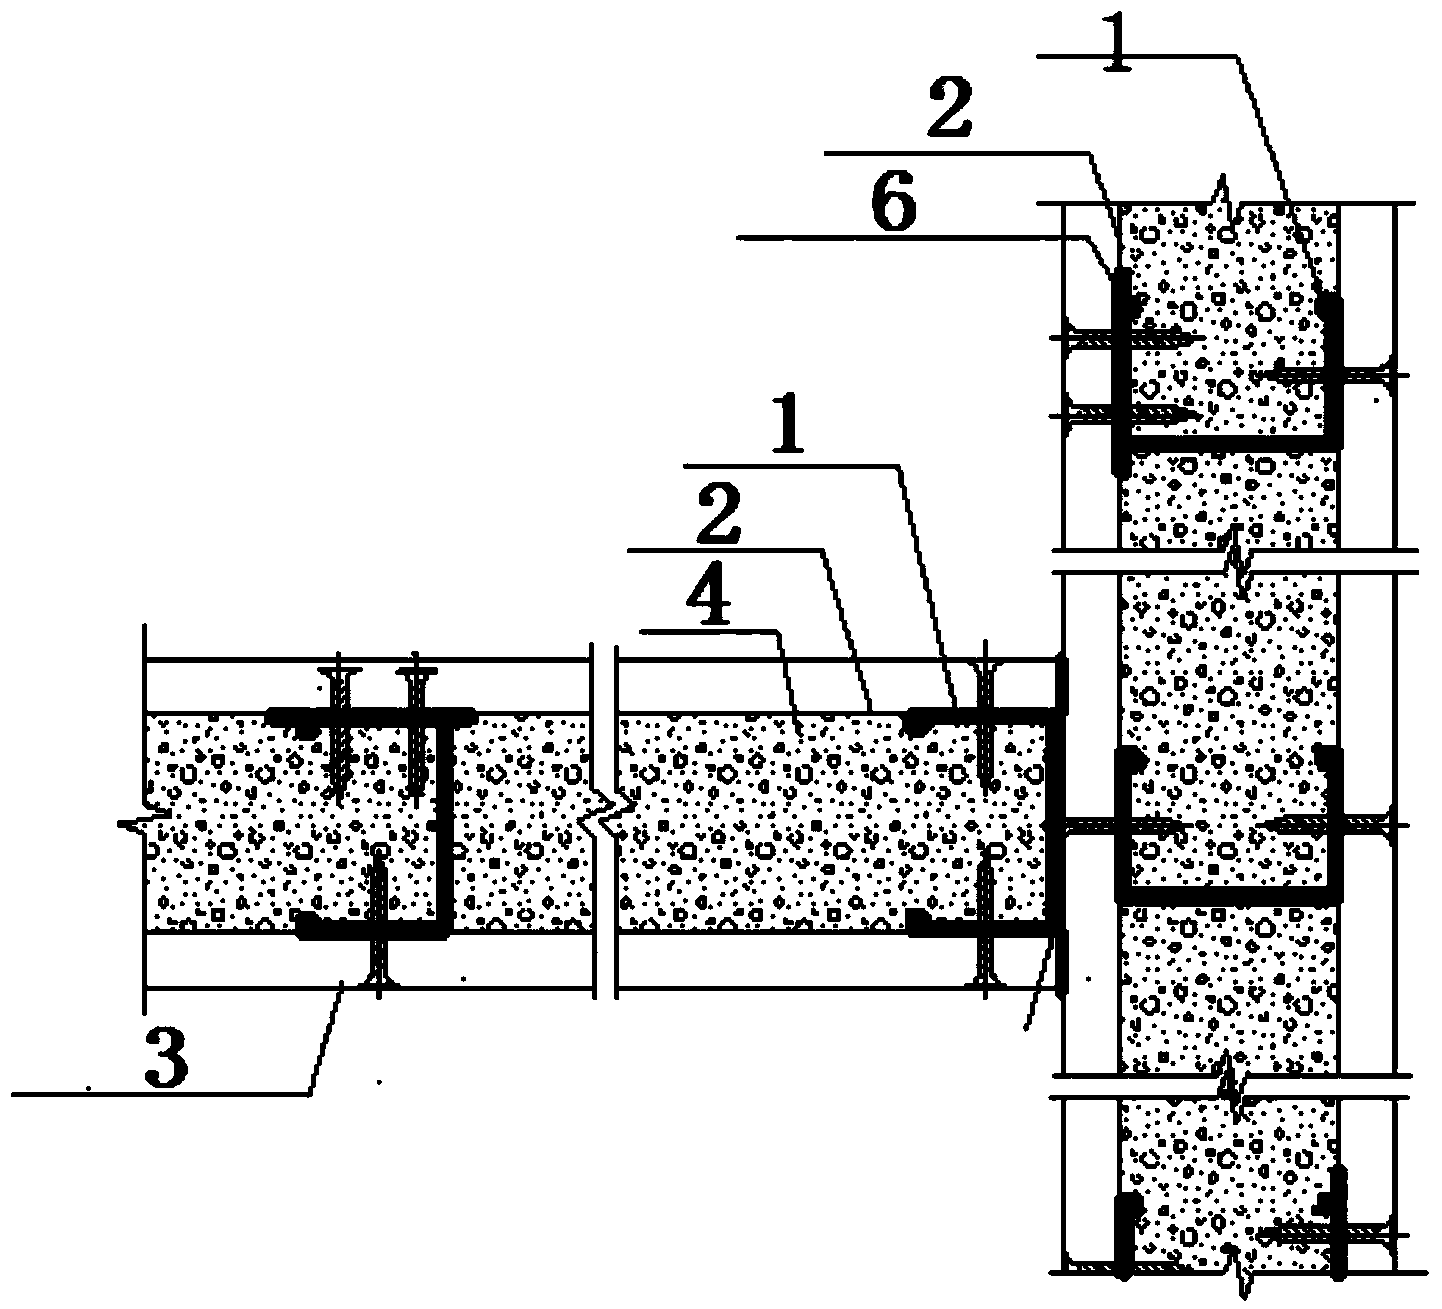 Construction method for integrally grouting wall by lightweight concrete through CCA board